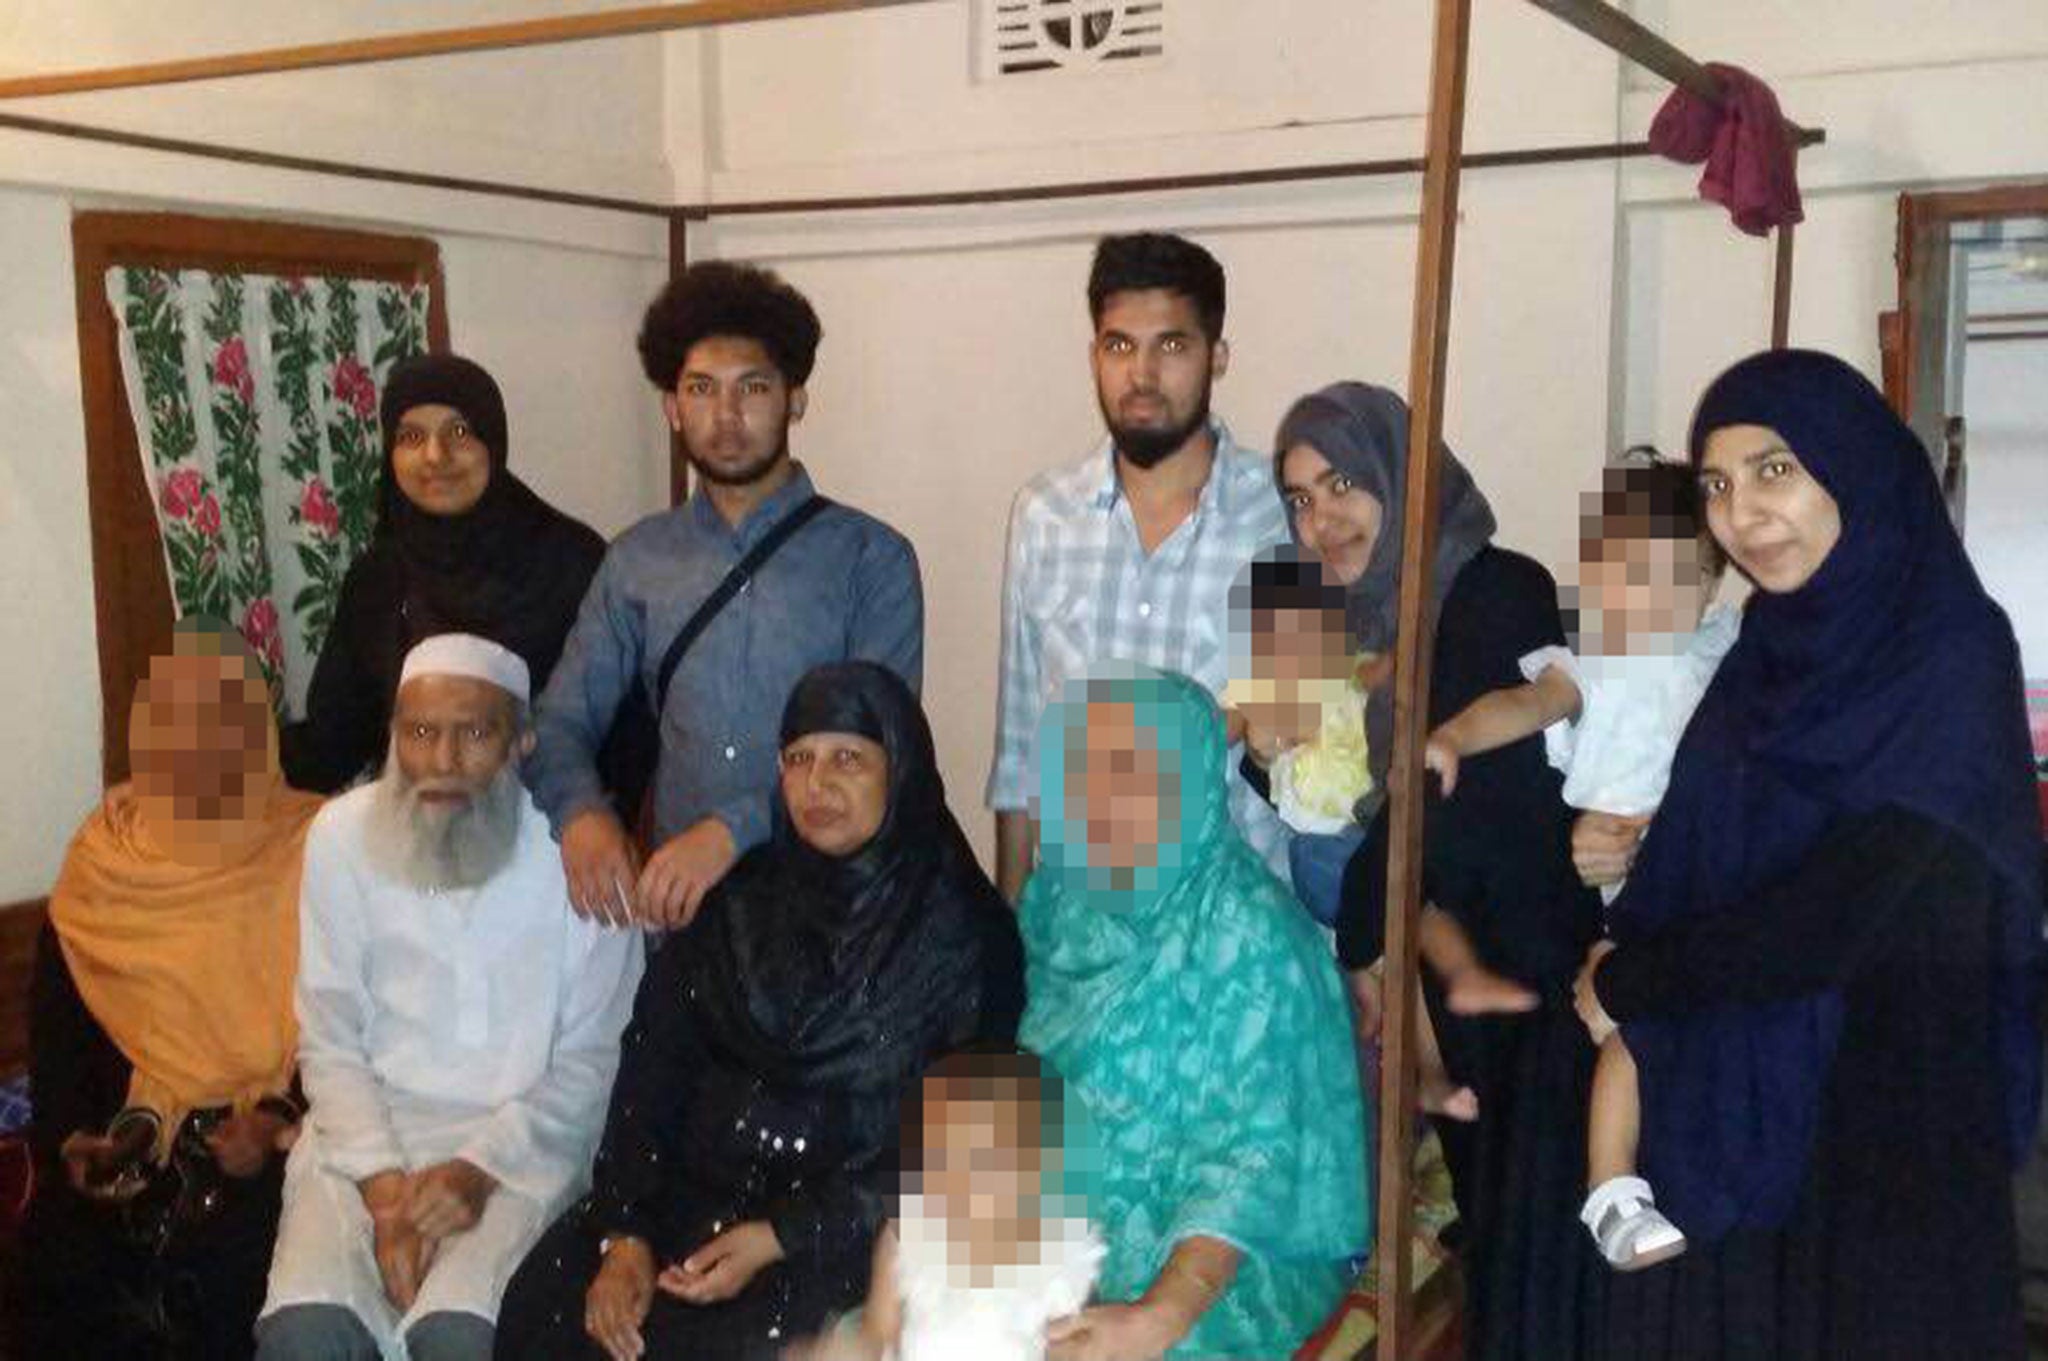 21-year-old Rajia Khanom (back row, far left) was spoken to by police at Heathrow